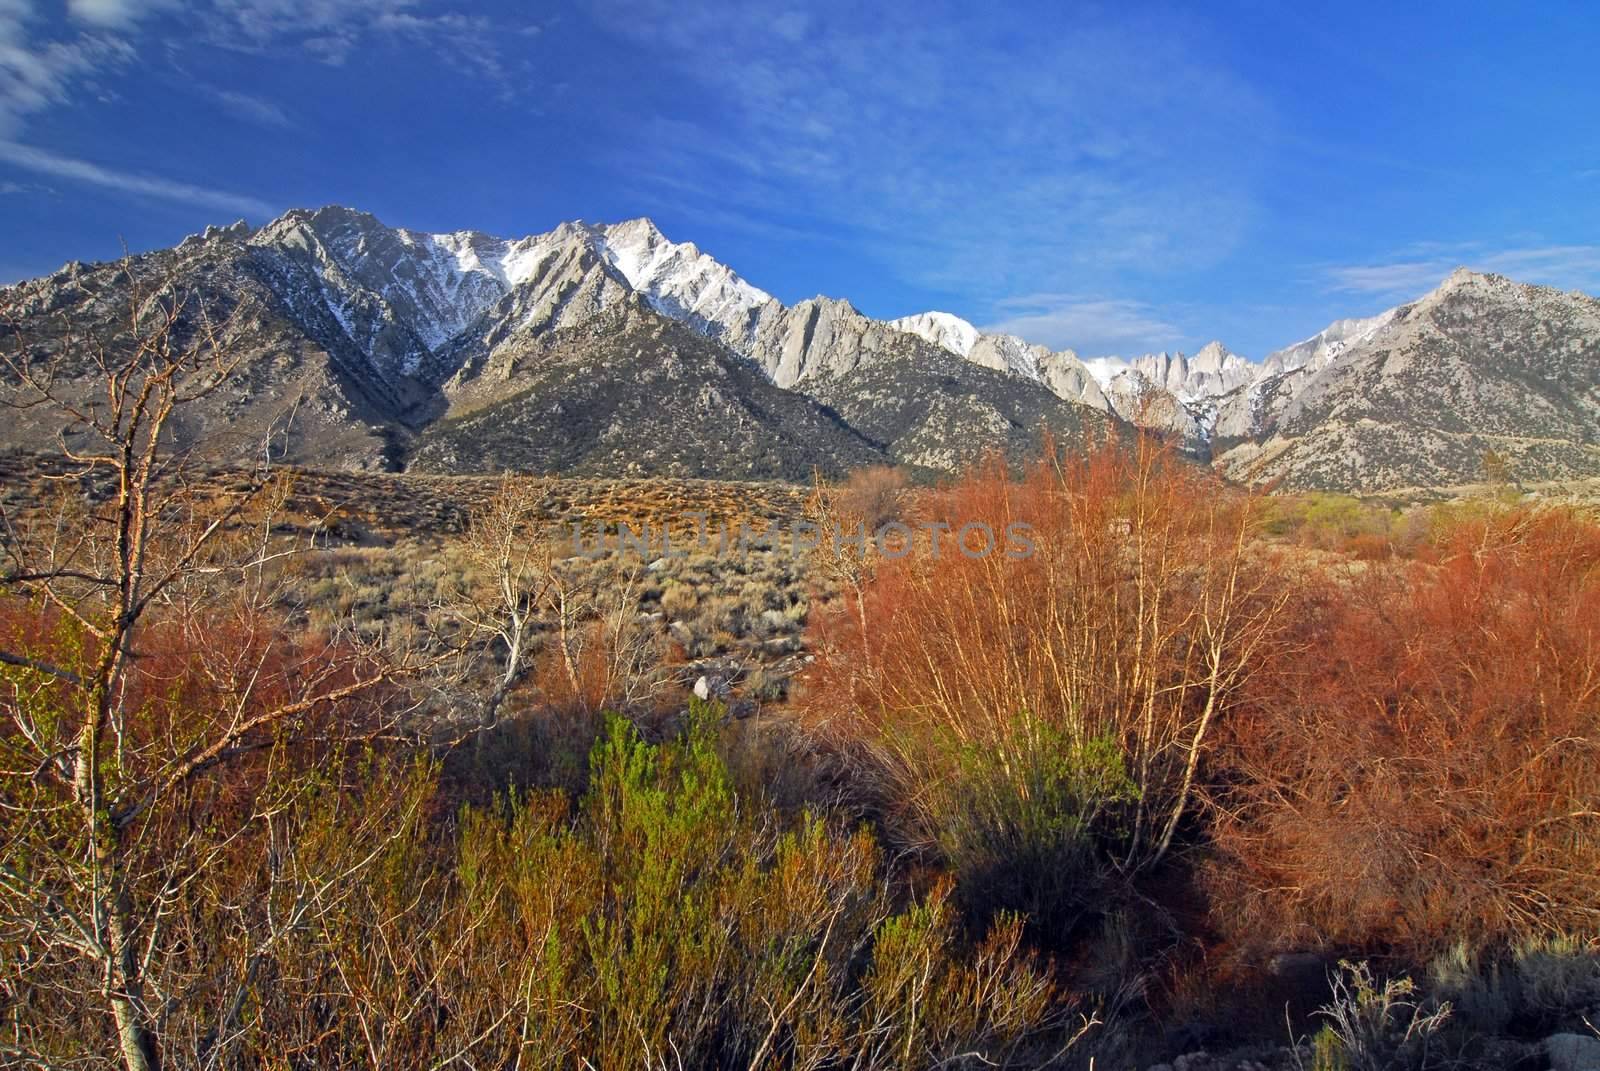 Snow capped Mount Whitney Peak in DeathValley, California